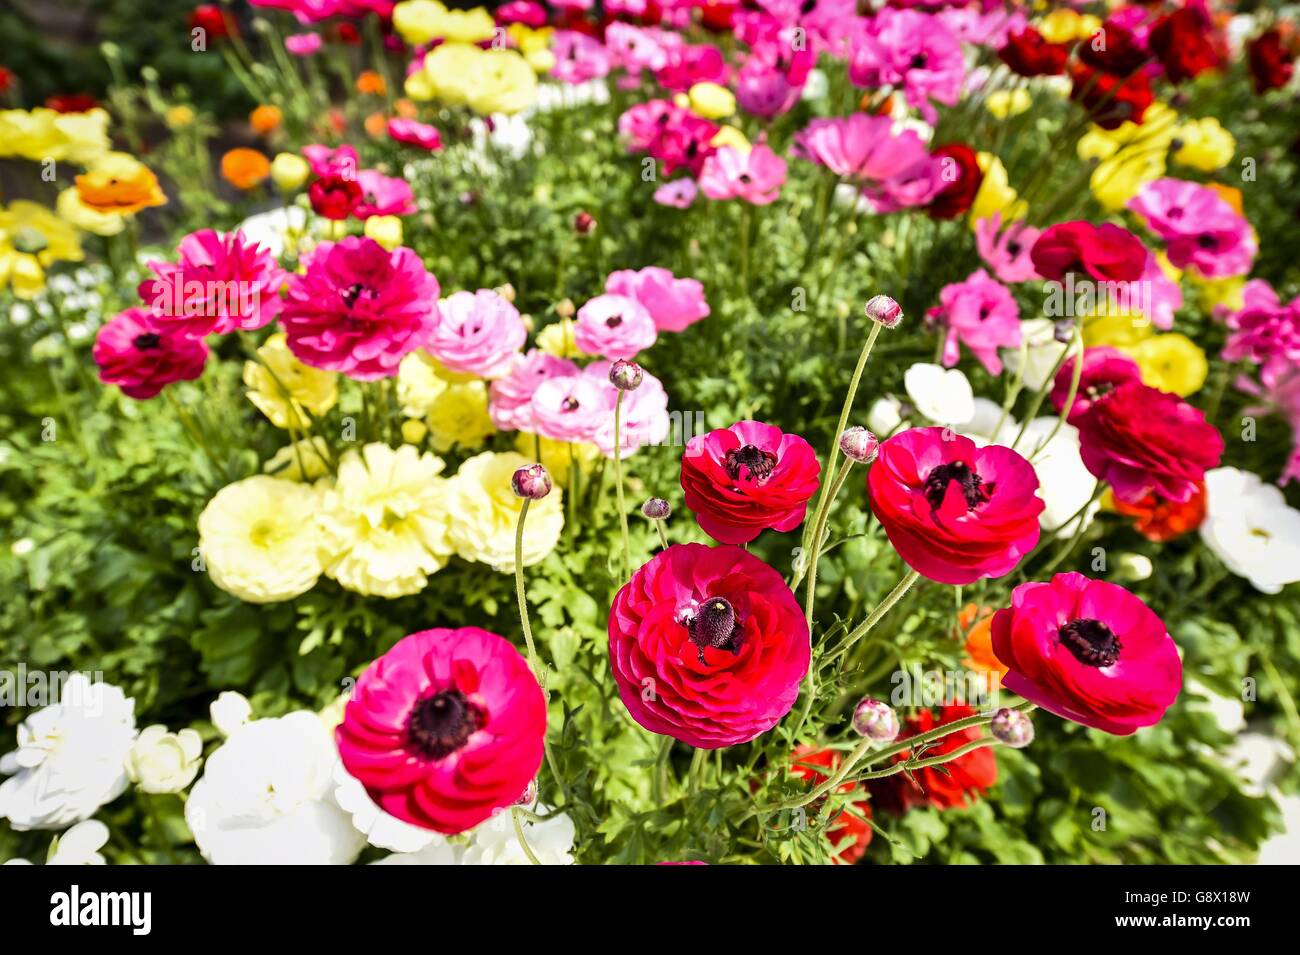 Persian Buttercups in full bloom at the Eden Project in Cornwall, where spring is helped along by the huge biomes creating a Mediterranean-style climate, giving spring flowers even more impact and vibrancy, especially the Buttercups, which are usually found in the eastern Mediterranean and south west Asia. Stock Photo